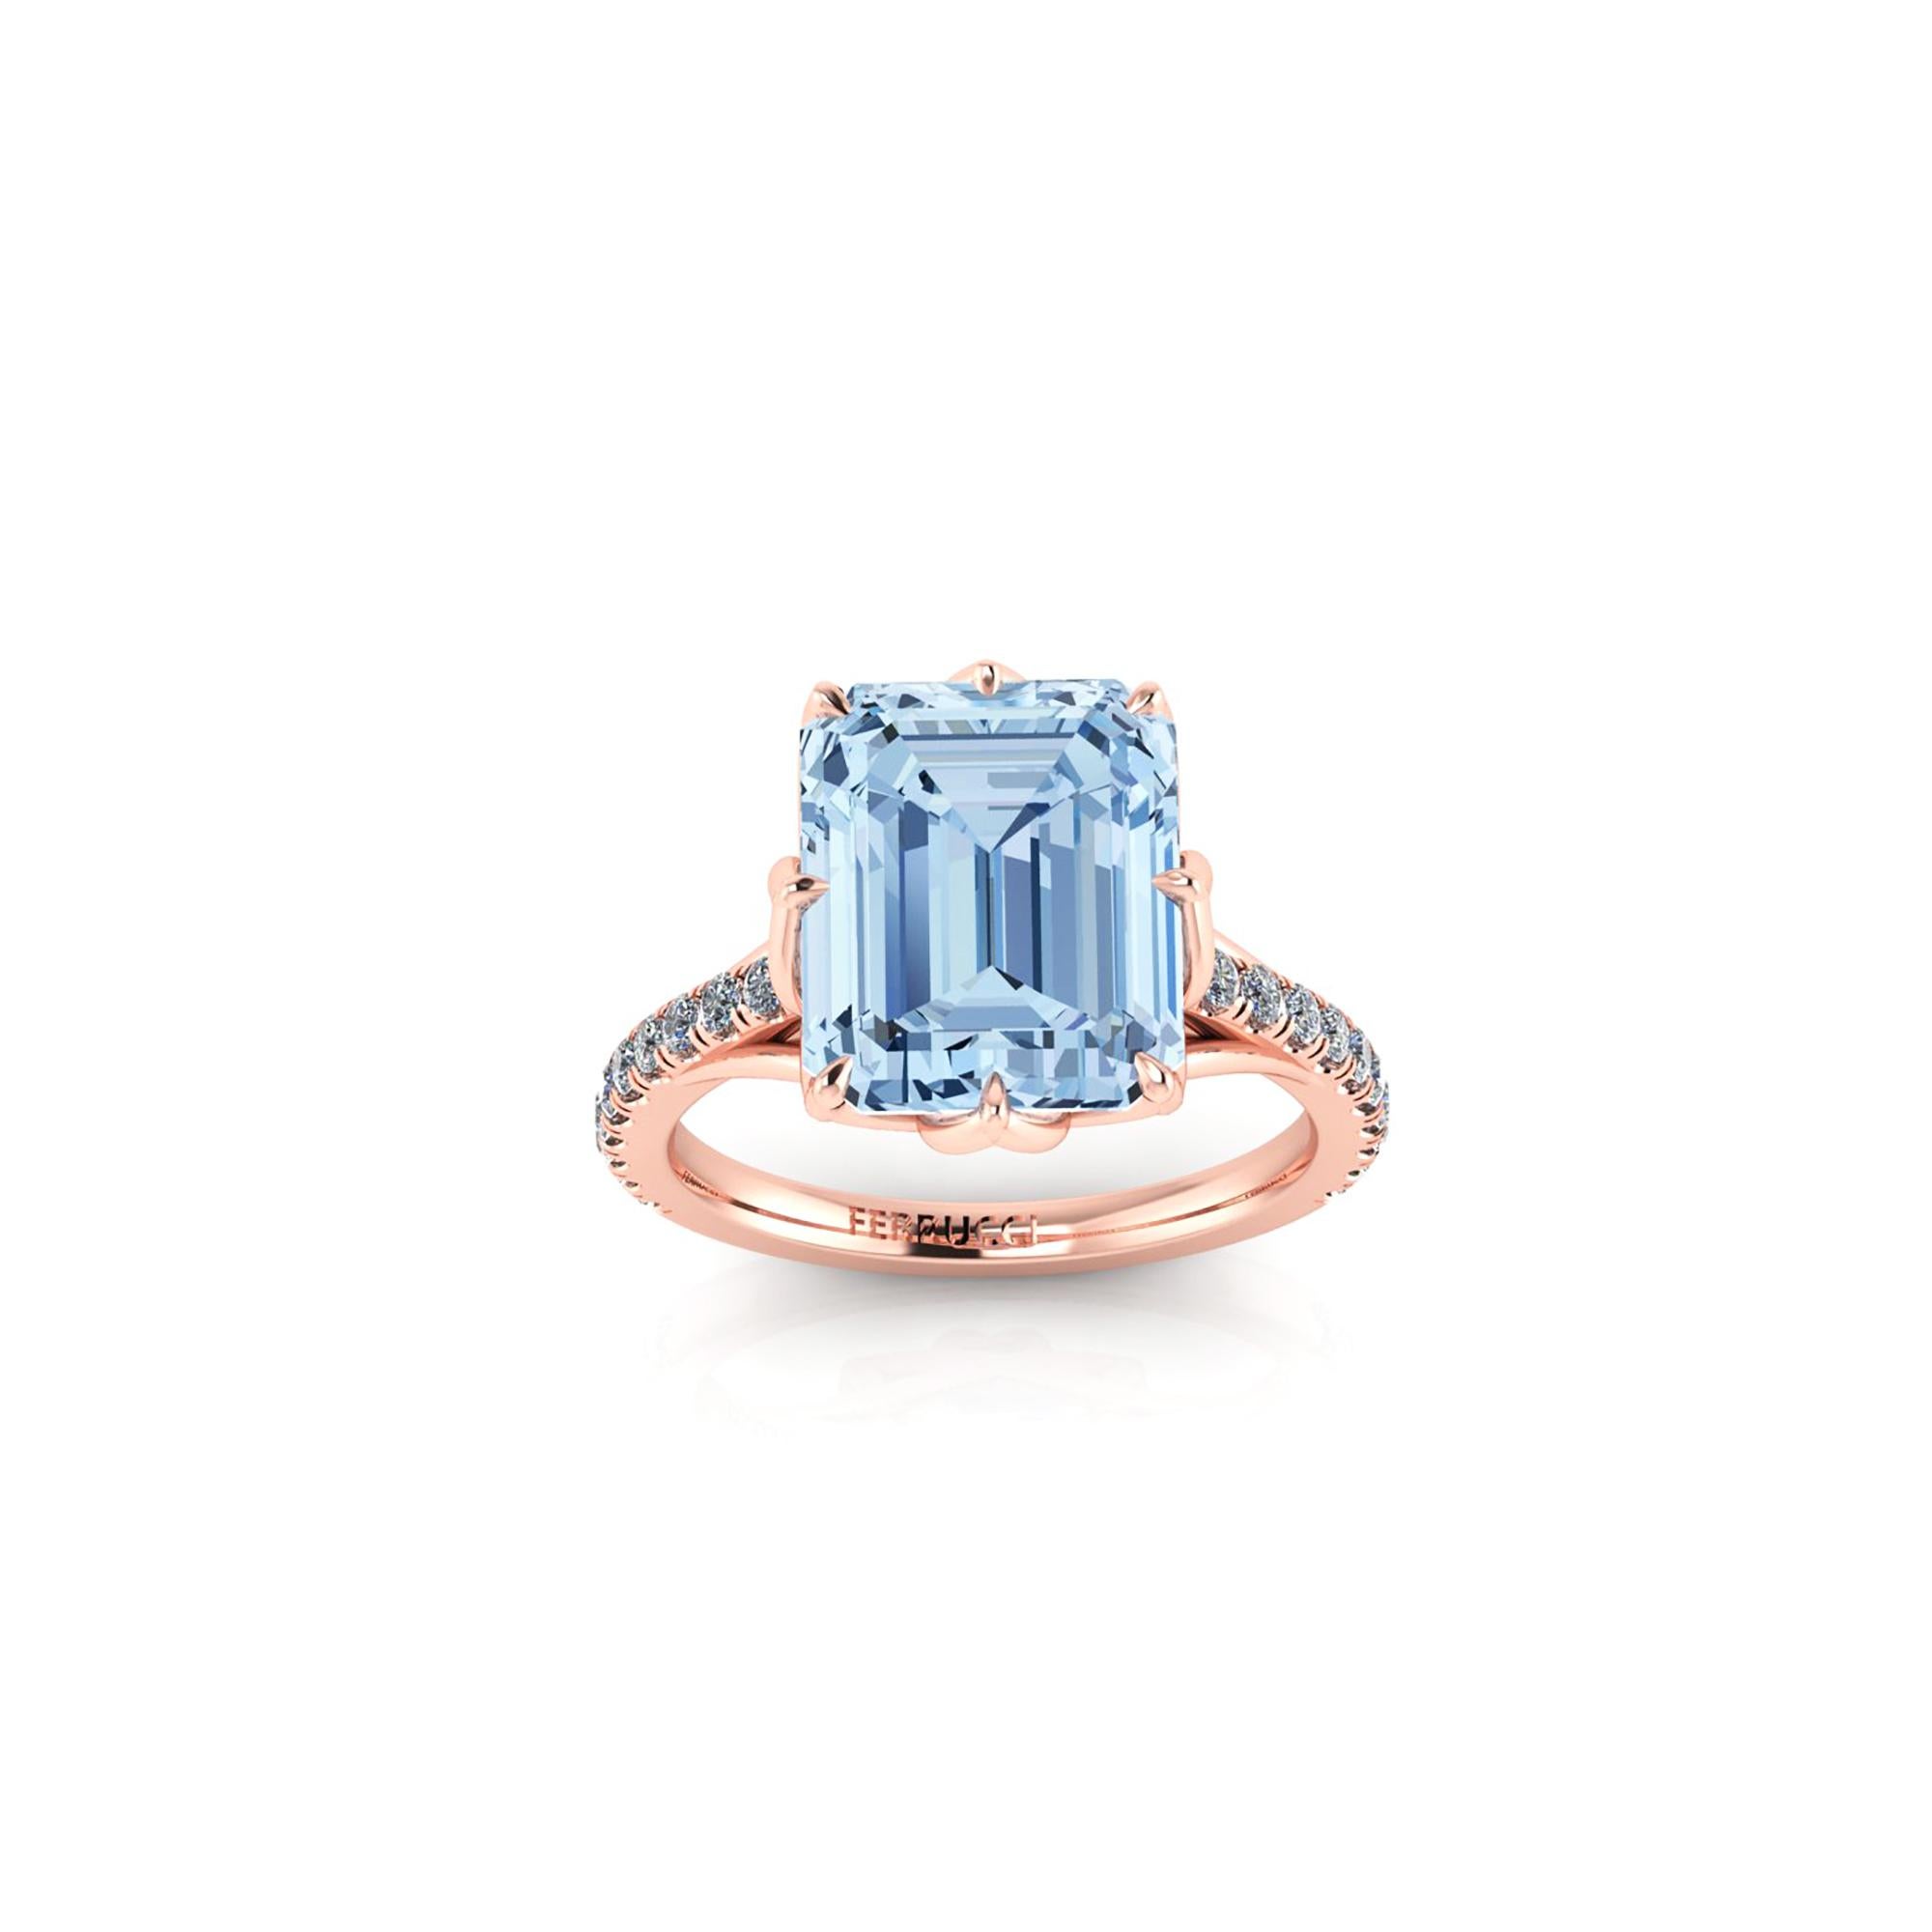 4.54 carat Aquamarine, emerald cut, very high quality color, eye clean gem, with a pave' of bright white diamonds G color, of approximately  total carat weight of 0.35 carat, set in a 18k rose gold floral-vine motive,  manufactured with the best